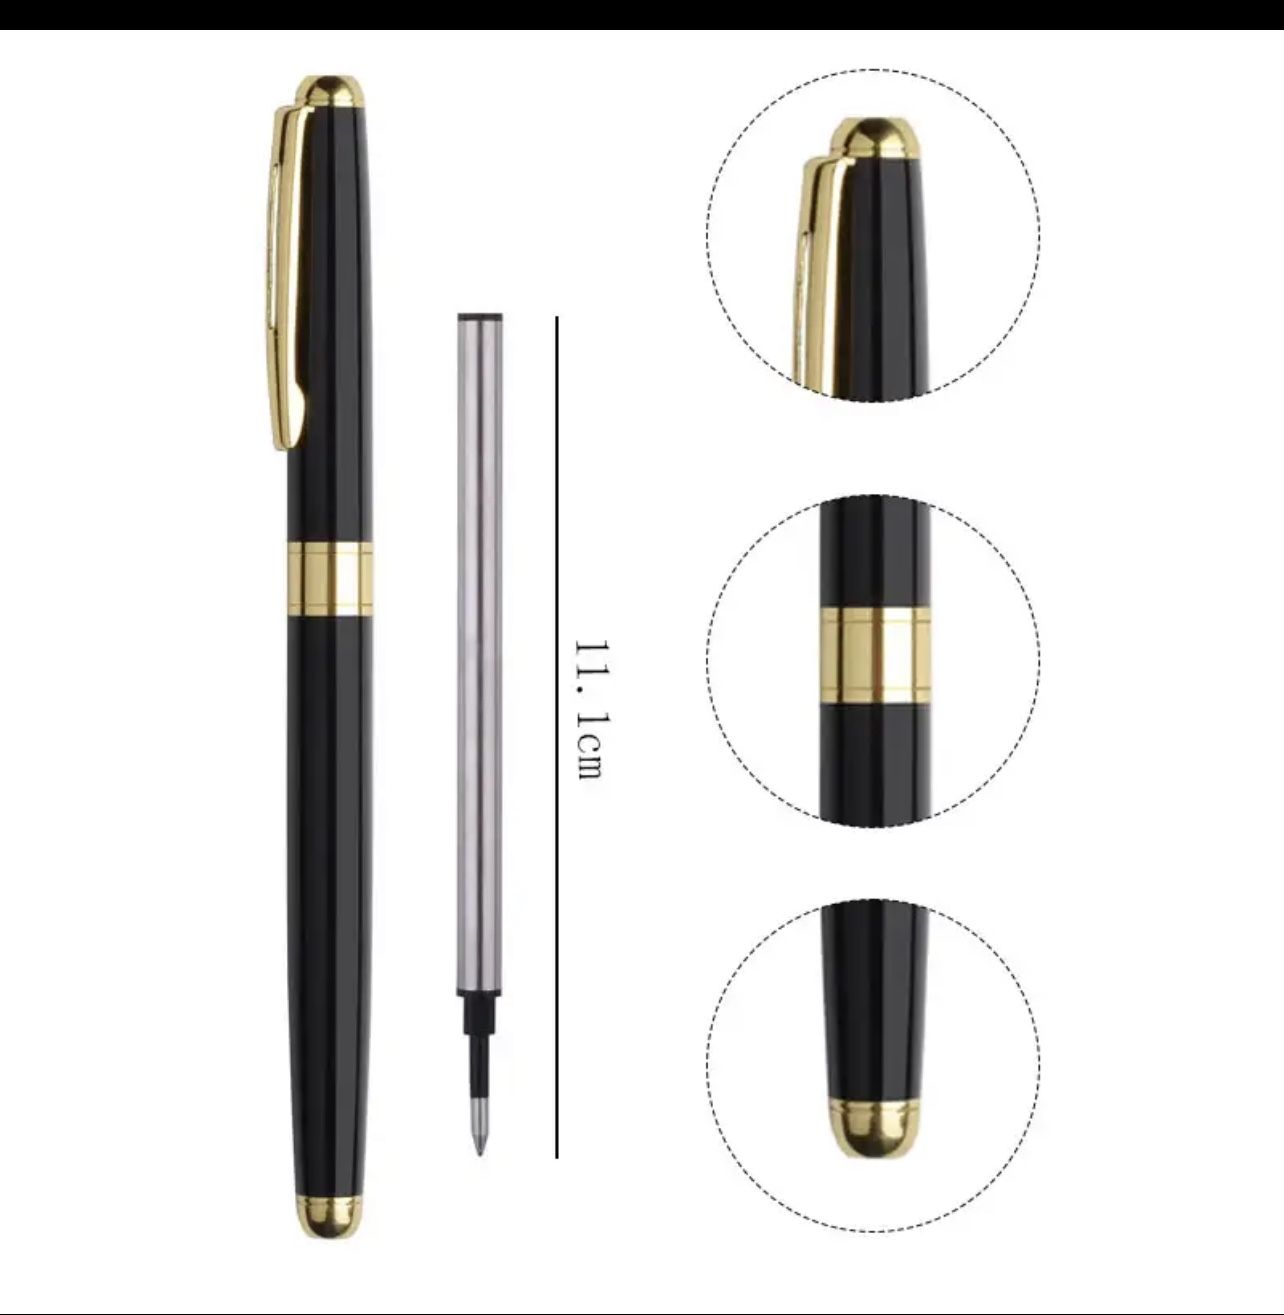 High quality ballpoint pen business signing School